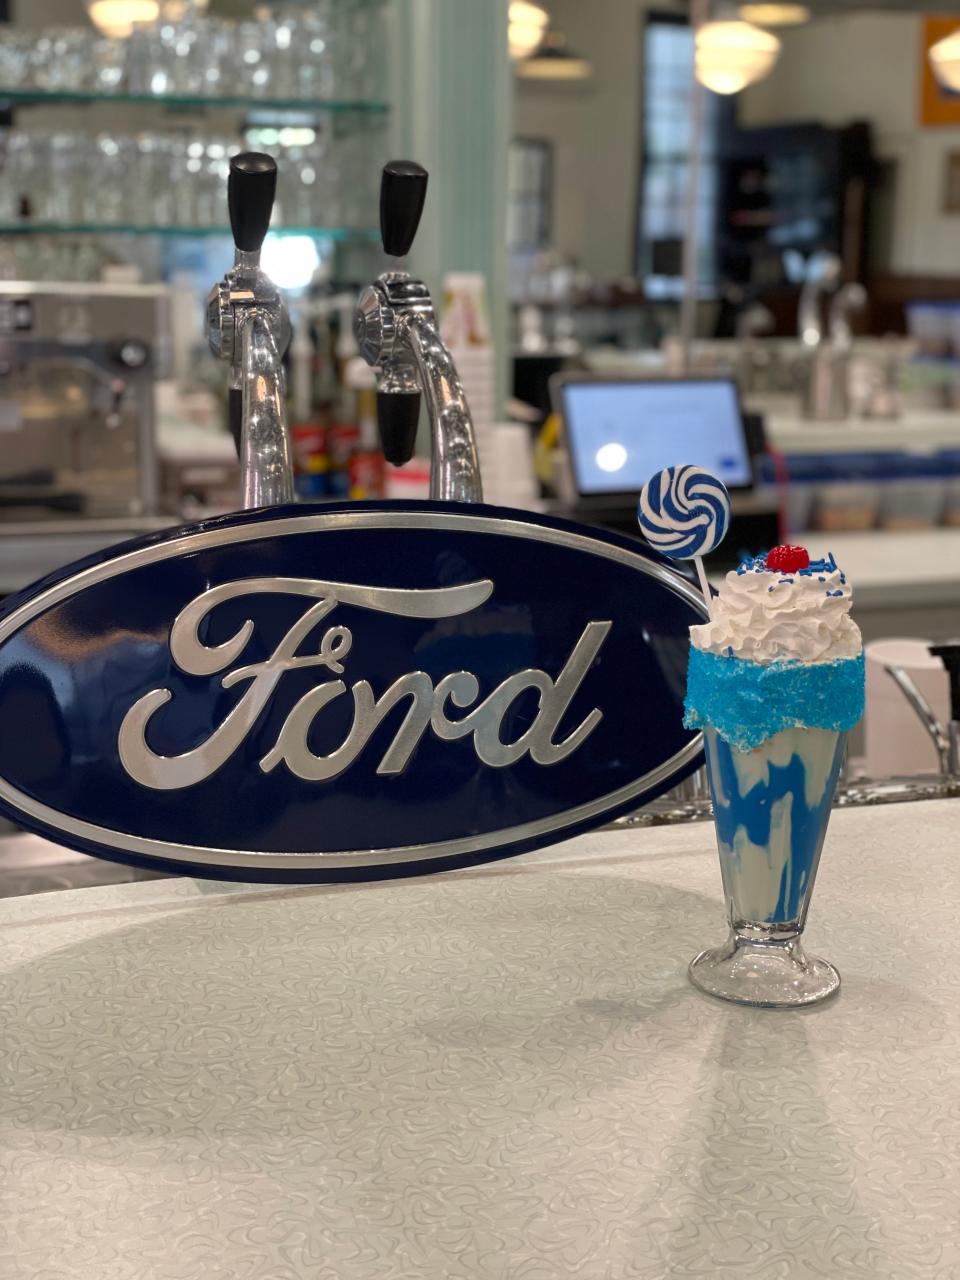 Livingston's Soda Fountain and Grill in Brownsville debuted its BlueOval City milkshake Wednesday, July 27. The milkshake is birthday cake flavored topped with blue sprinkles and served with a blue sucker.